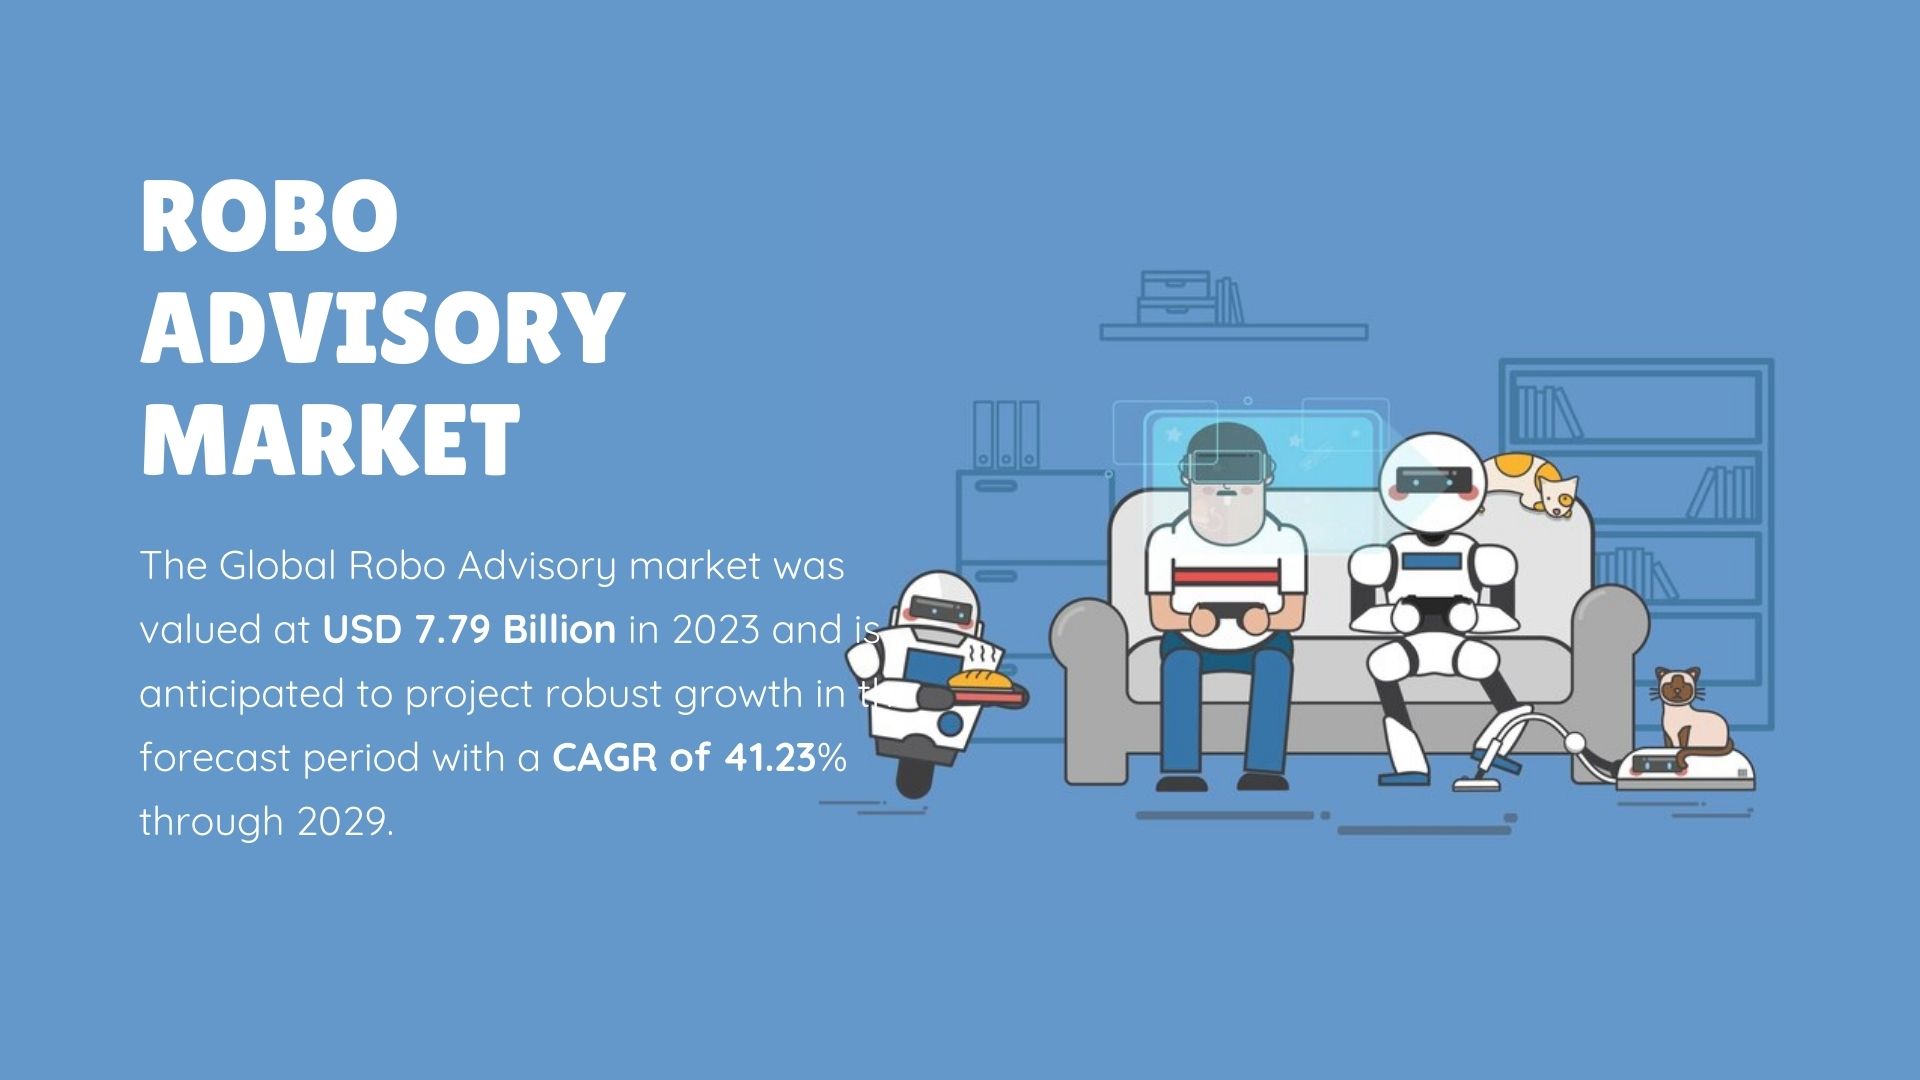 Robo Advisory Market: Projections, Strategies, and Outlook for Growth